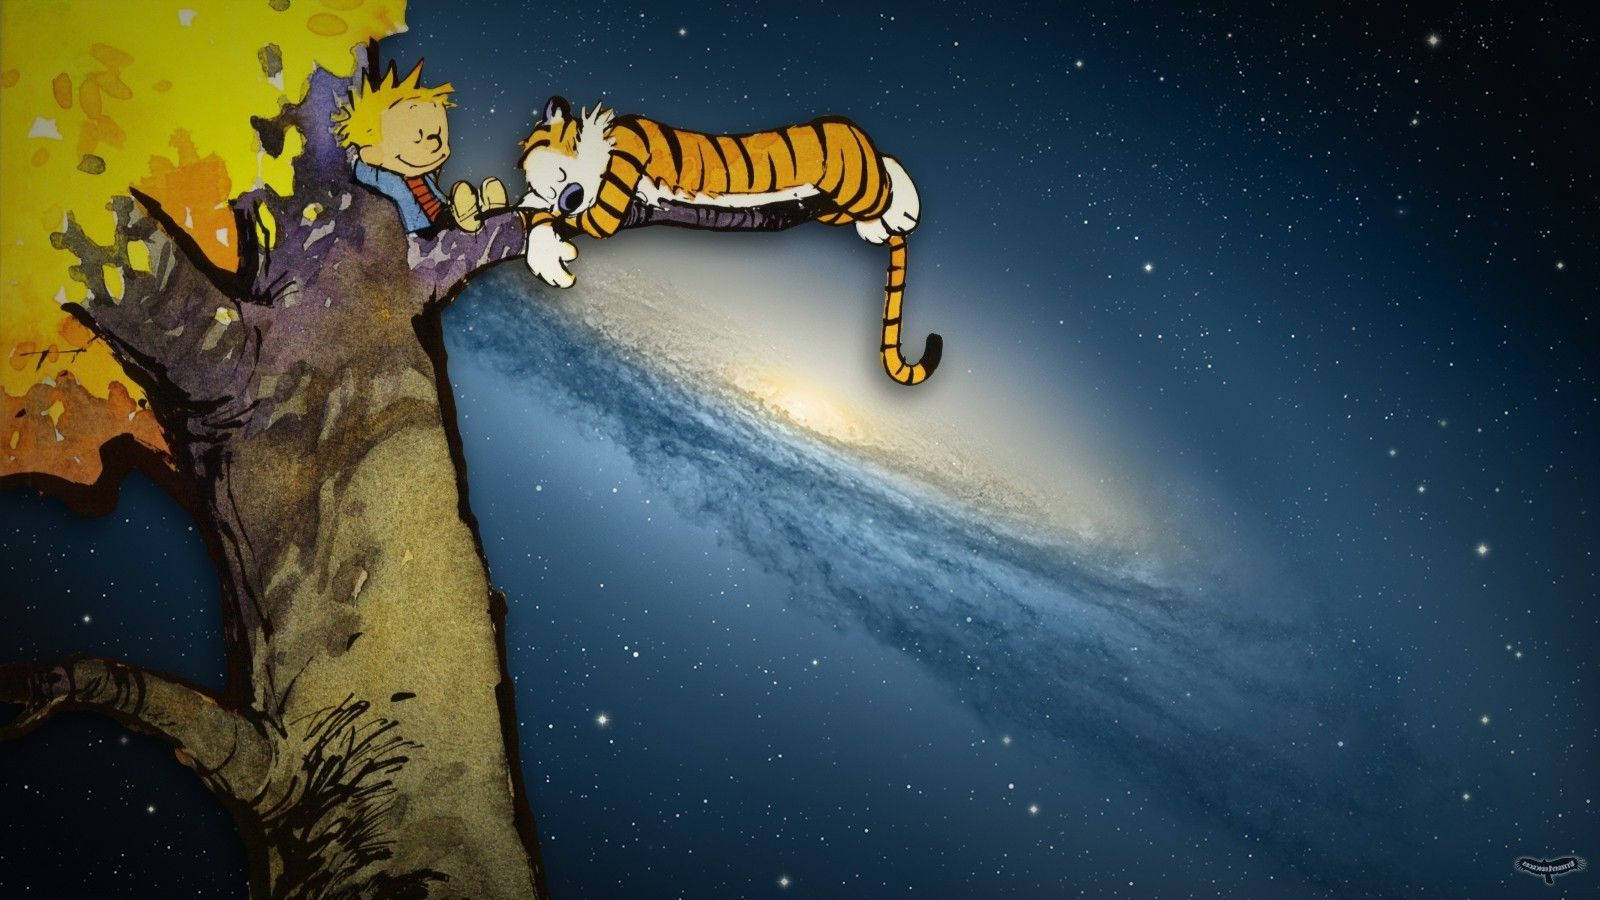 Calvin And Hobbes In The Tree Wallpaper